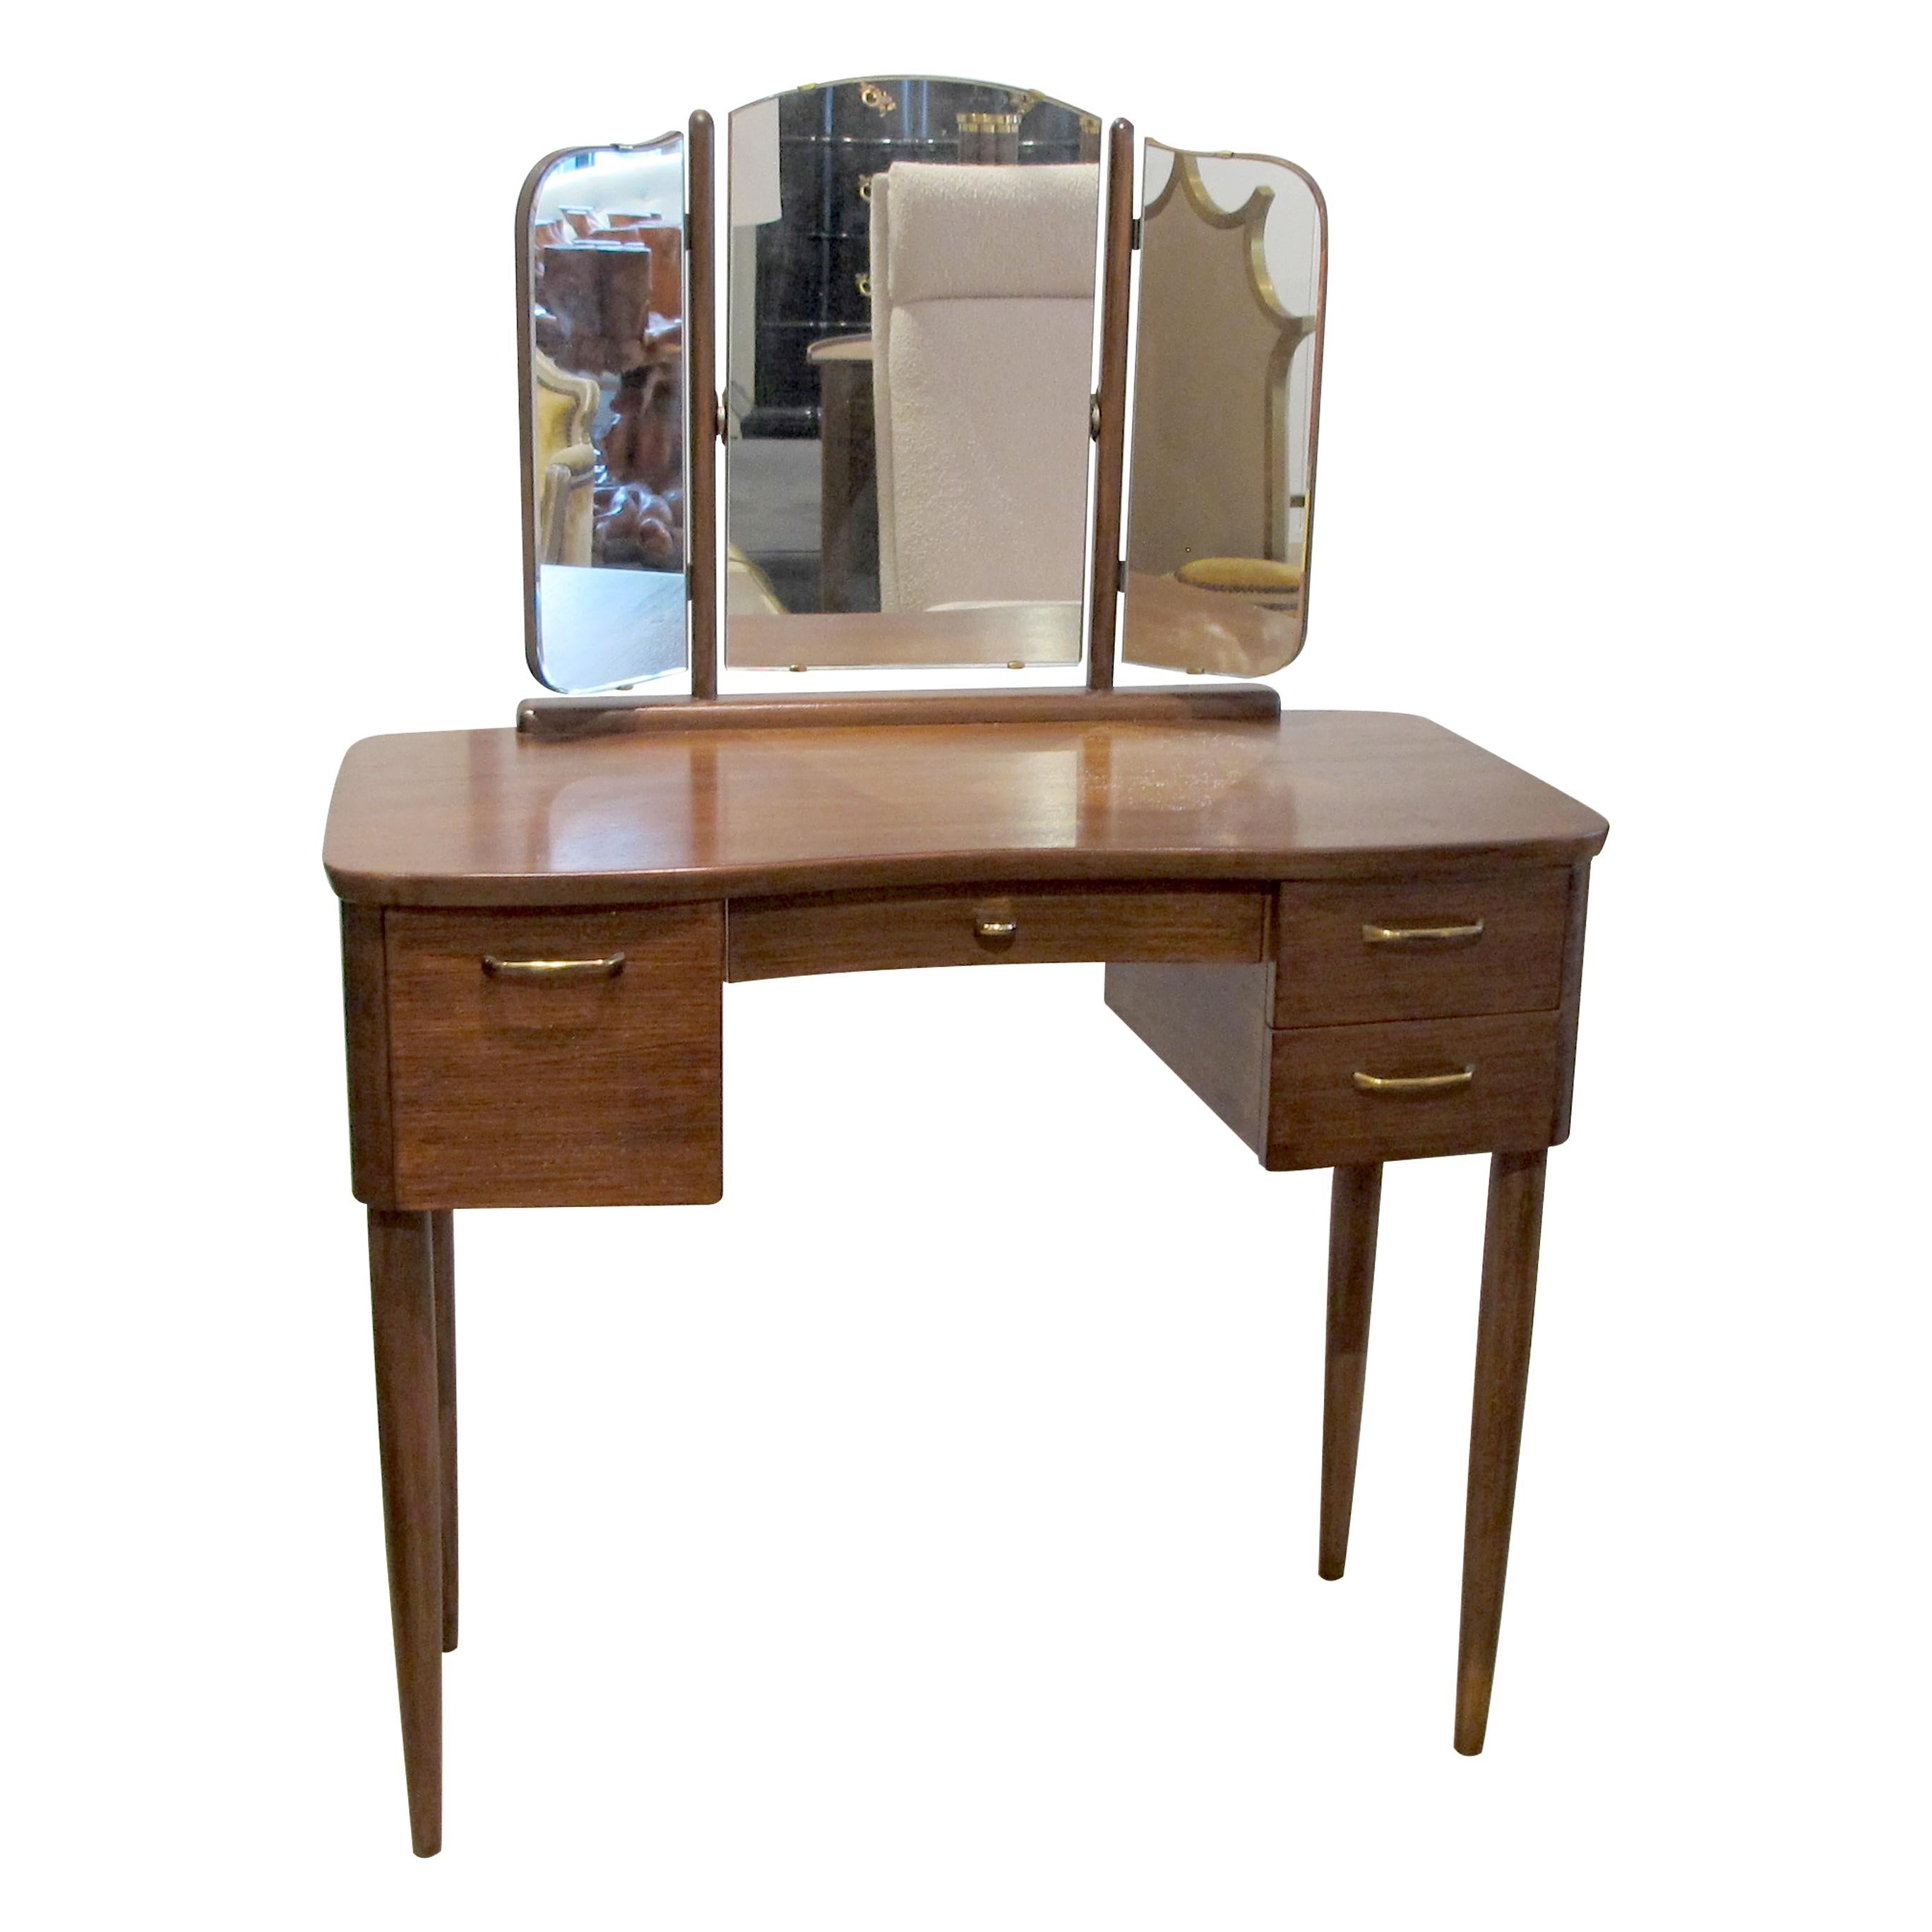 A 1940s Scandinavian dressing table with a triptych mirror and its original brass handles. The dressing table has two identical drawers on the right and a deep single drawer on the left and a shallow central drawer. This is a very well-made, compact